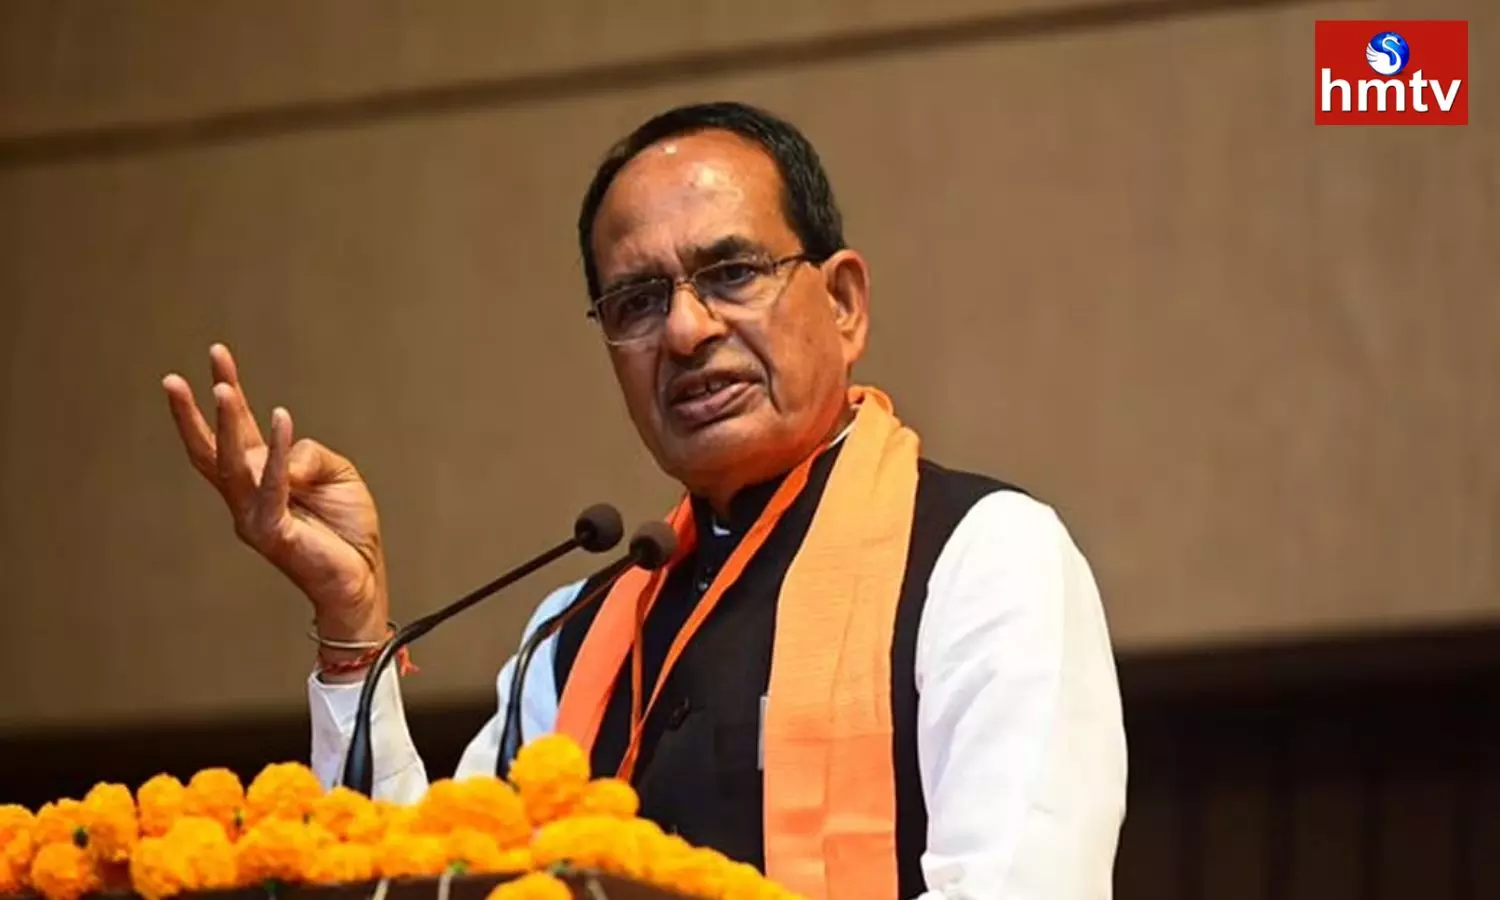 Leaders should come from the people says shivraj singh chouhan